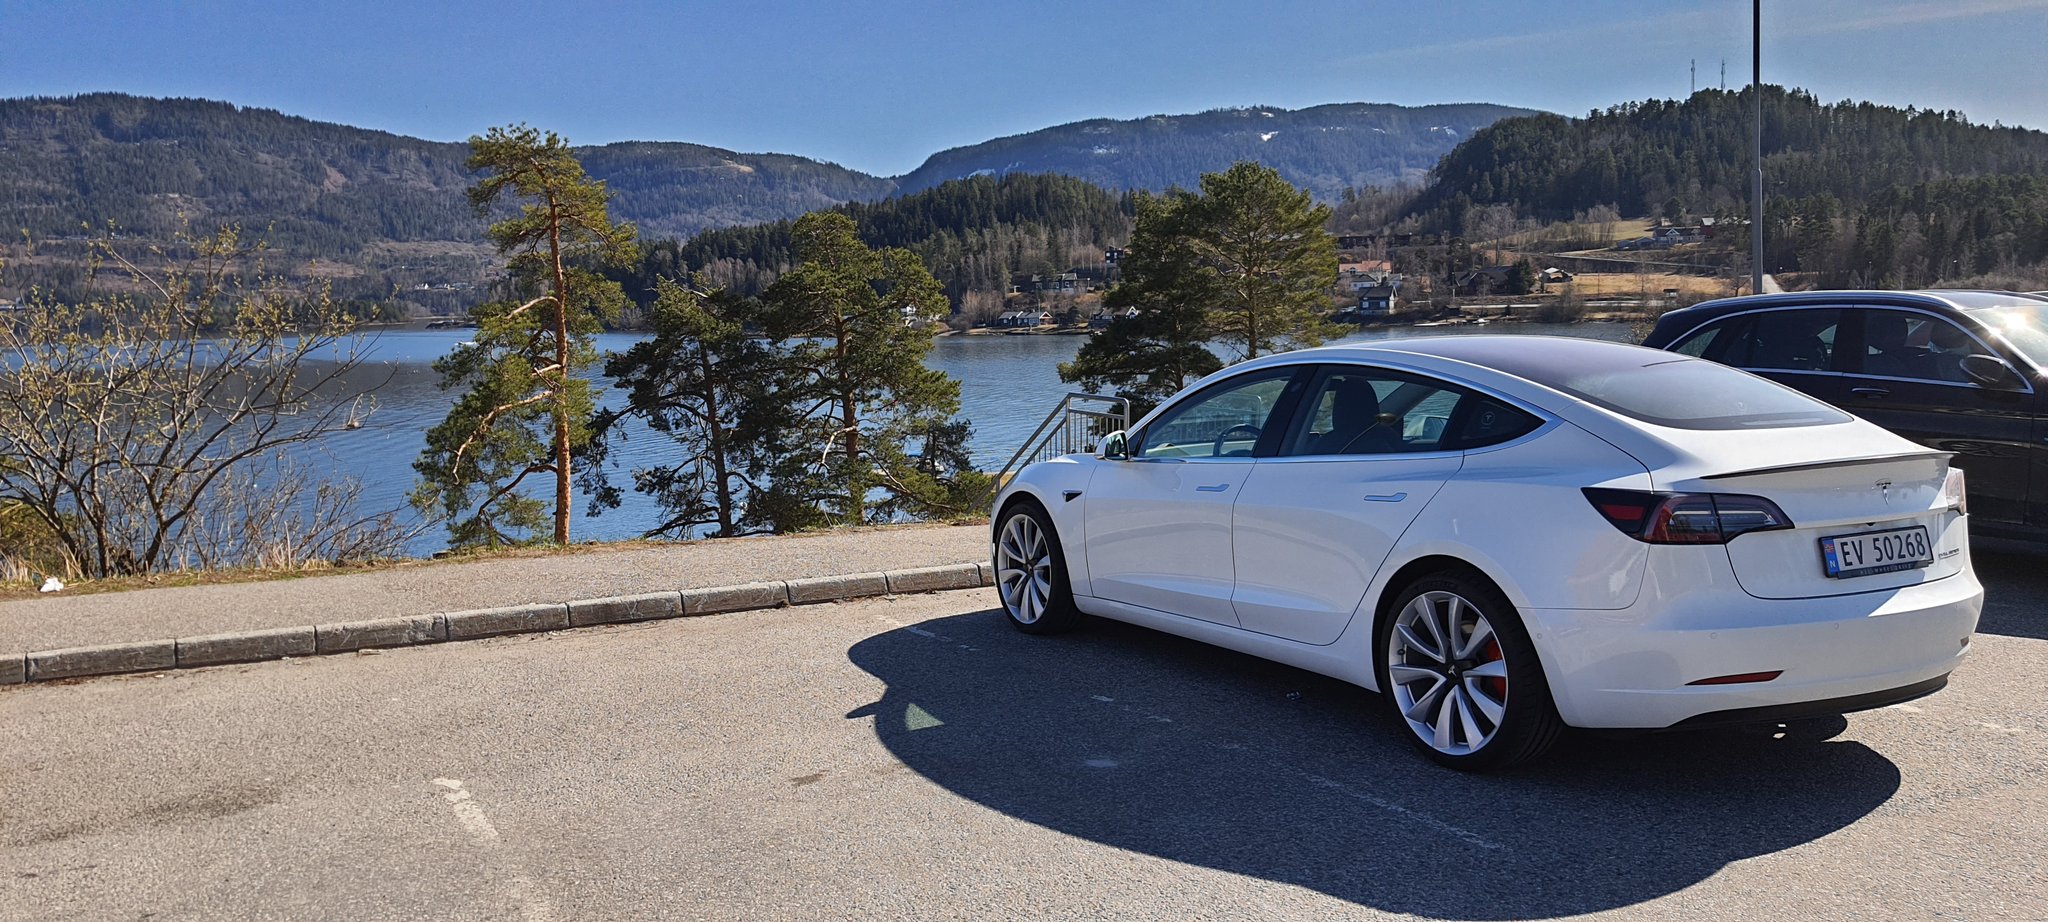 Tesla Has Highest Consumer Loyalty vs Other Car Brands in Norway